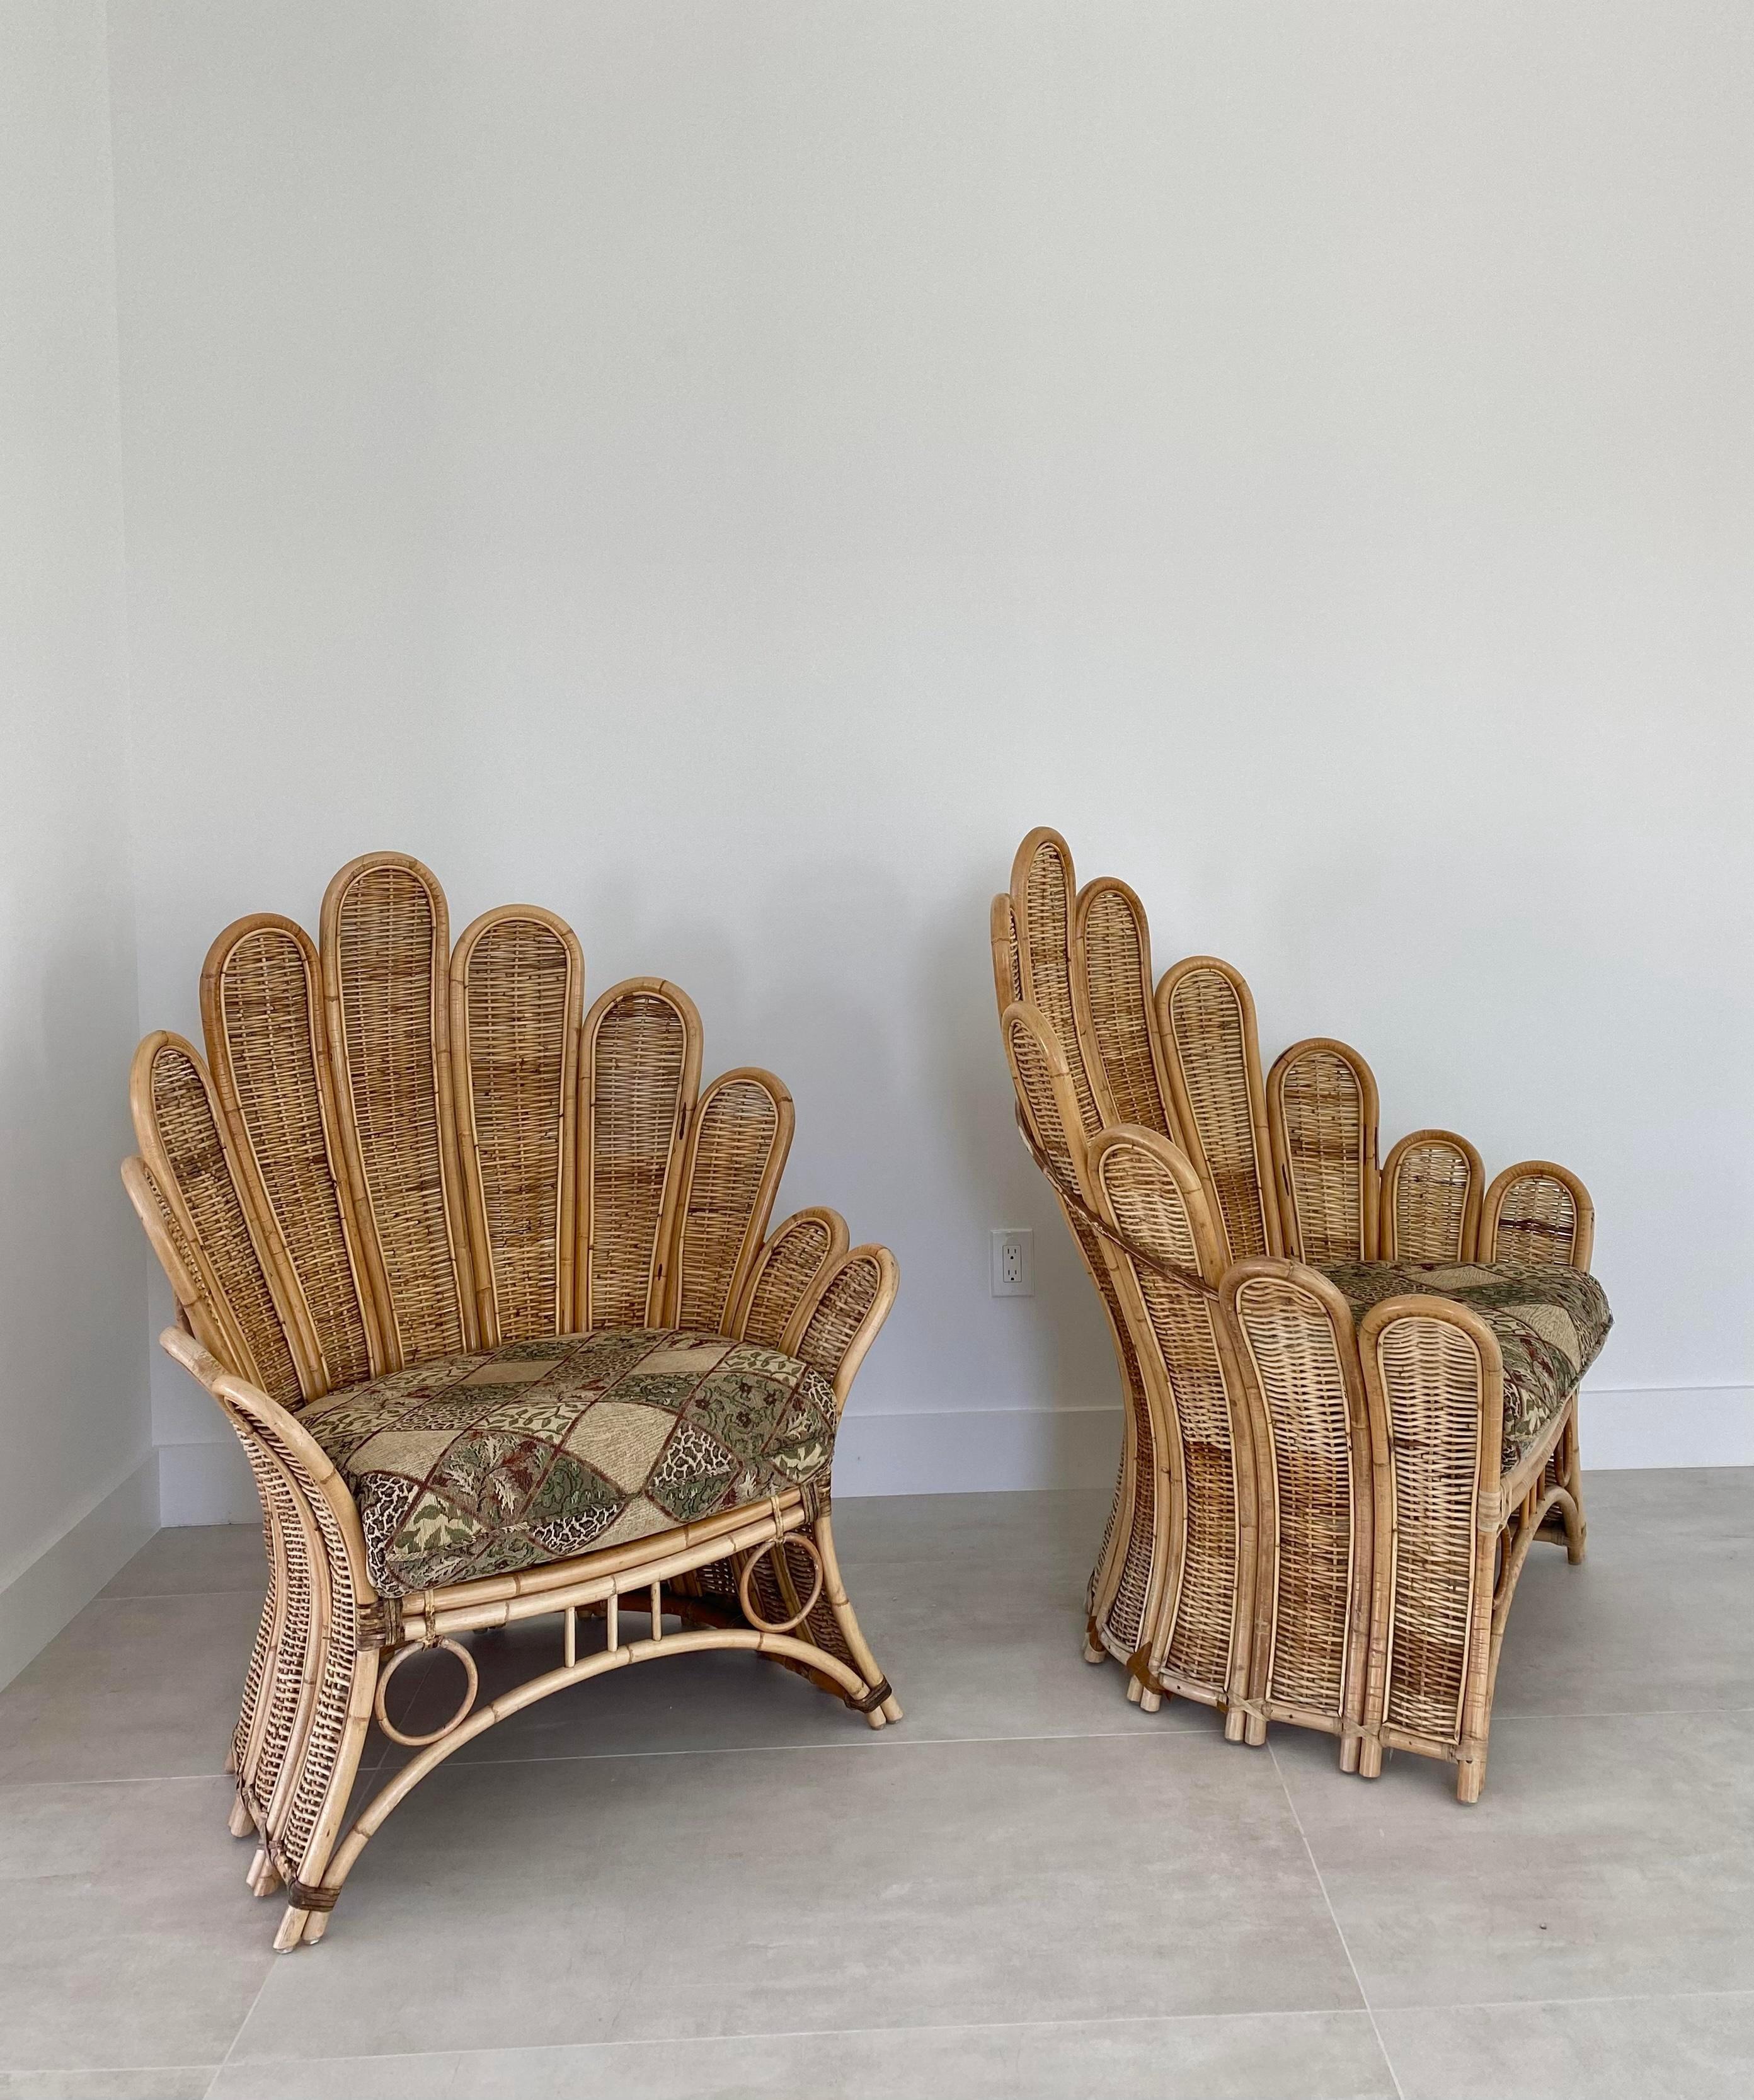 Large-scale palm frond lounge chairs, circa 1980s. Iconic design, in expertly constructed rattan and wicker frames with quality leather binding accents. These chairs are rare to market, especially as a pair, and capture a tropical warm feel and the